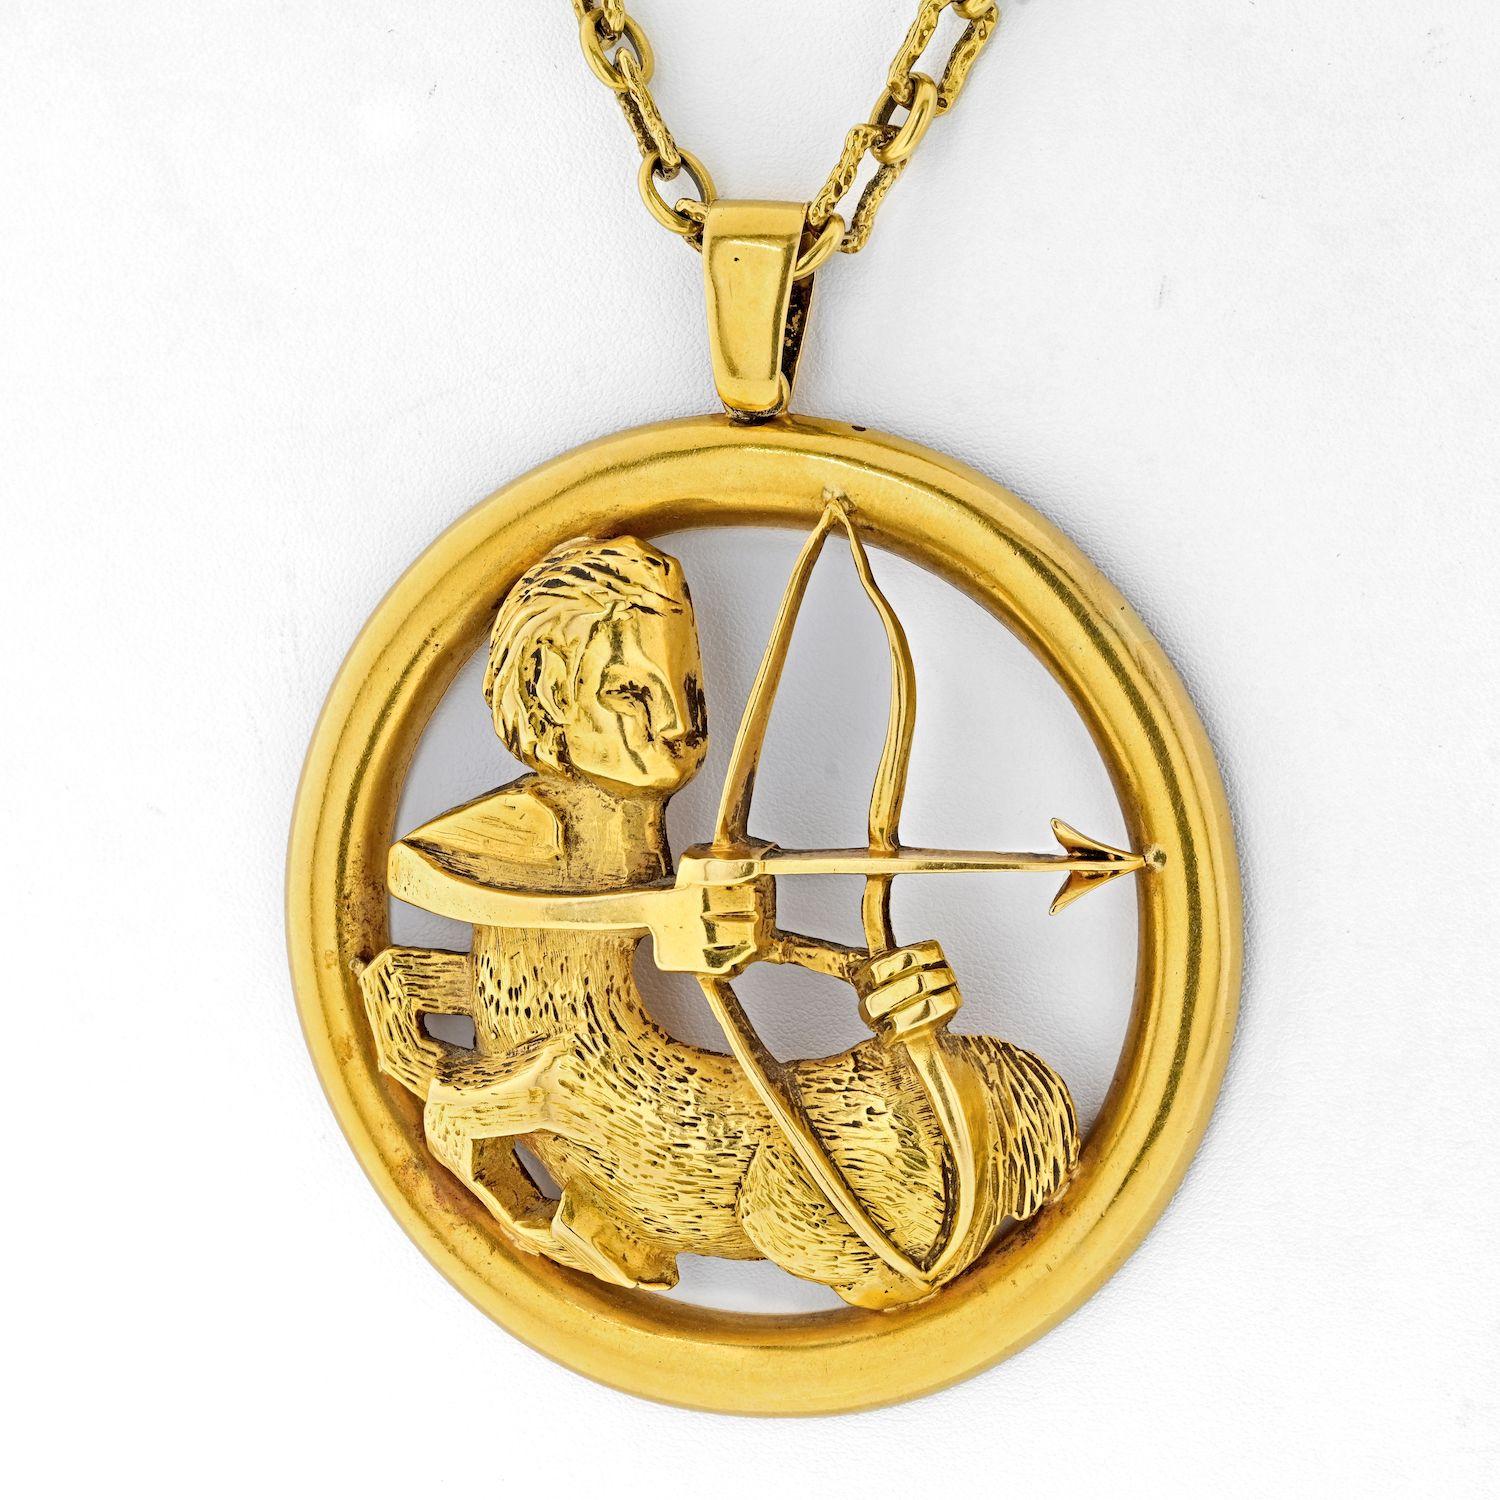 Sagittarius Zodiac Necklace designed by Chaumet.

Very rare, oversized and massive piece, created in Paris France by the jewelry house of Chaumet, back in the early 1970. This gorgeous Sagittarius Zodiac pendant has been crafted as an sculpture in